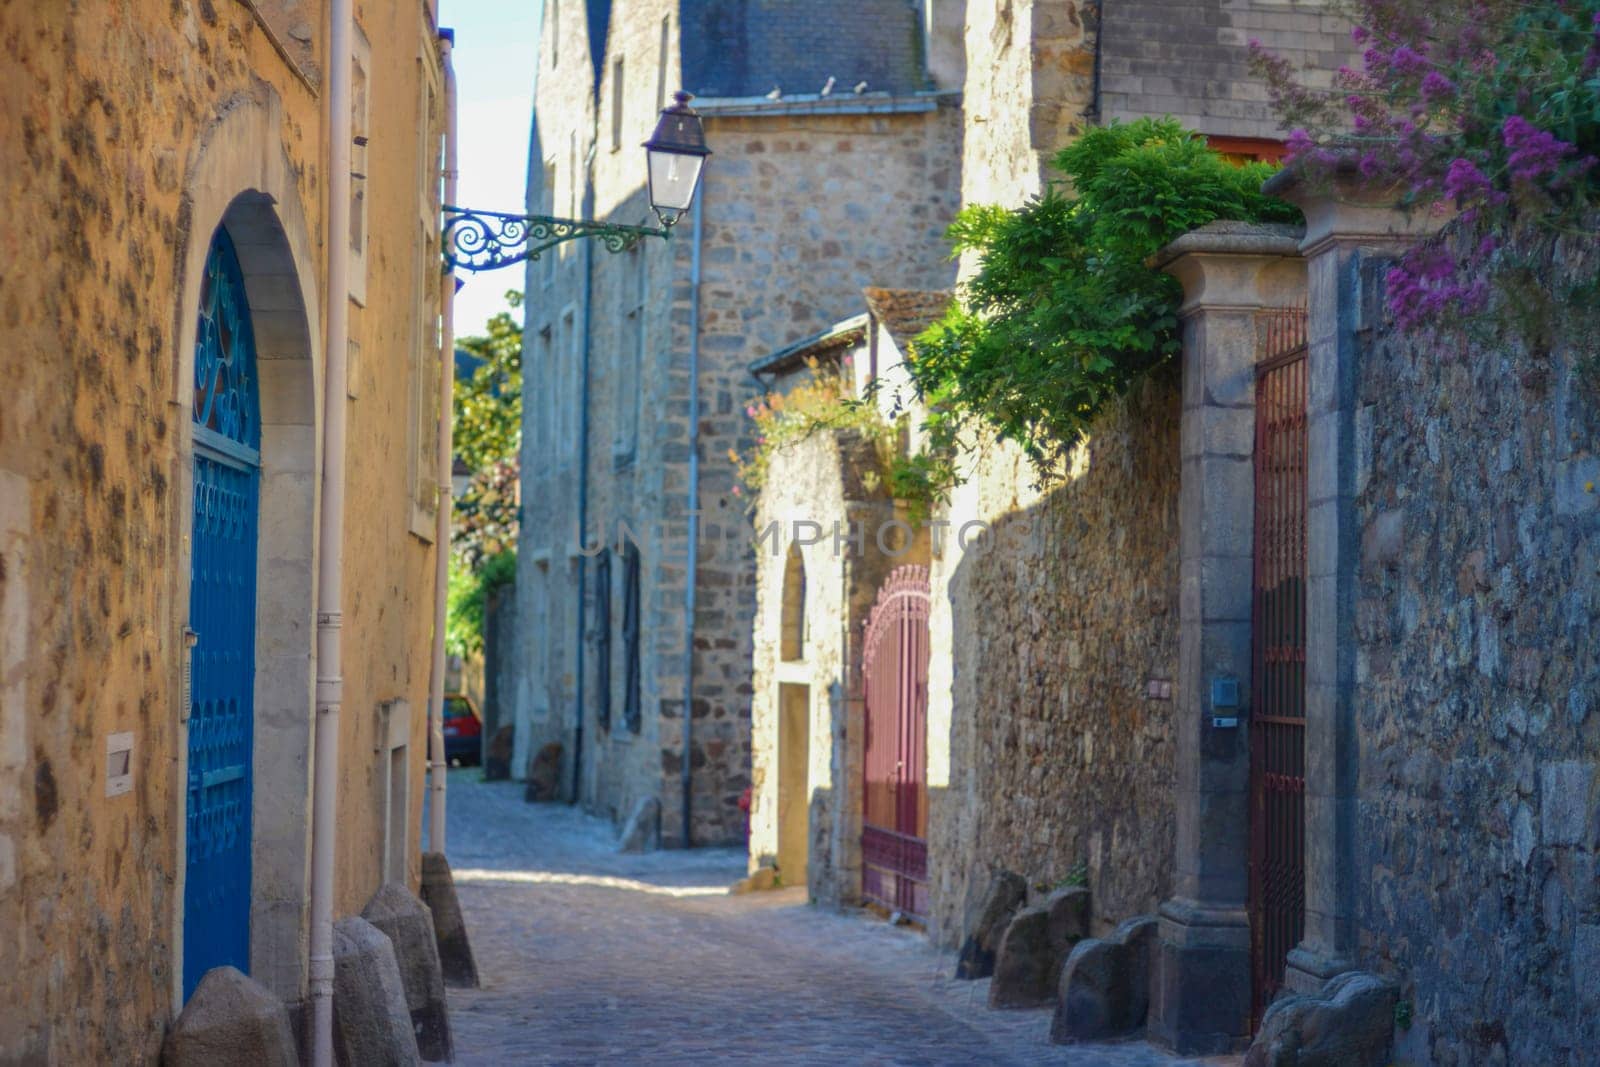 Narrow streets from paving stones with medieval stones for coachmen at a Le mans, France